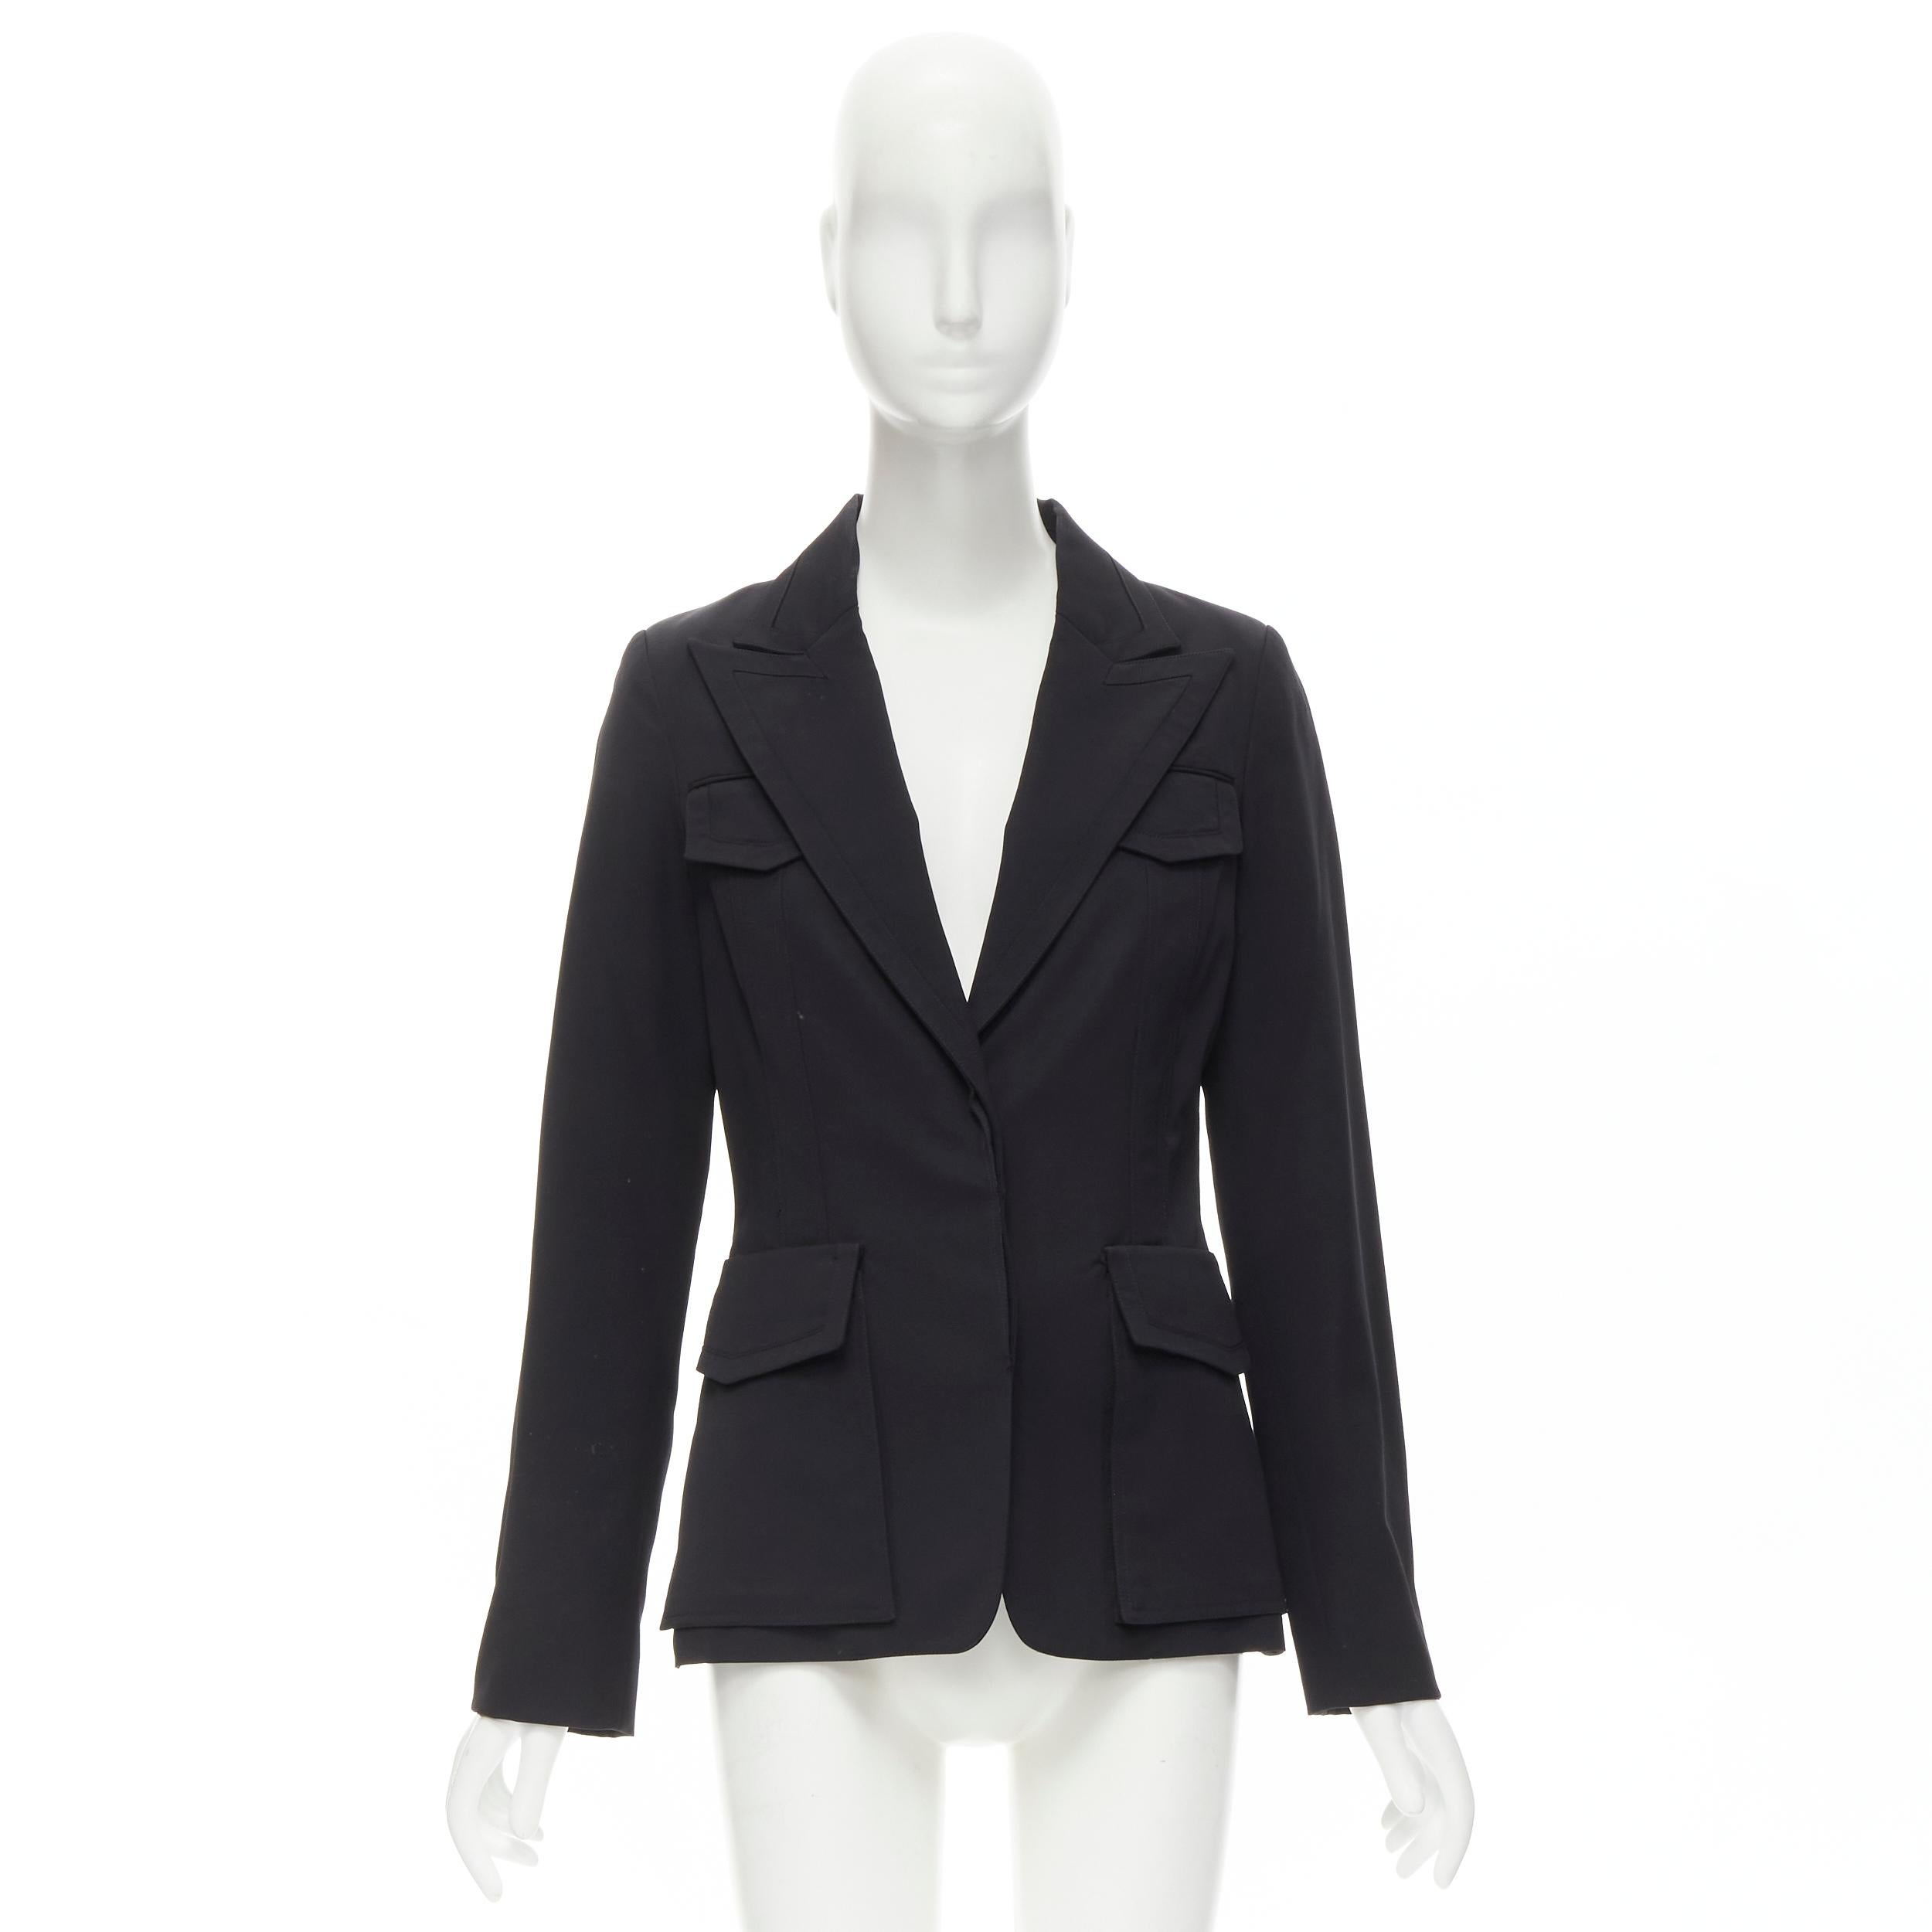 GUCCI 2003 Vintage Tom Ford military flap pockets black wool jacket IT42 M For Sale 3